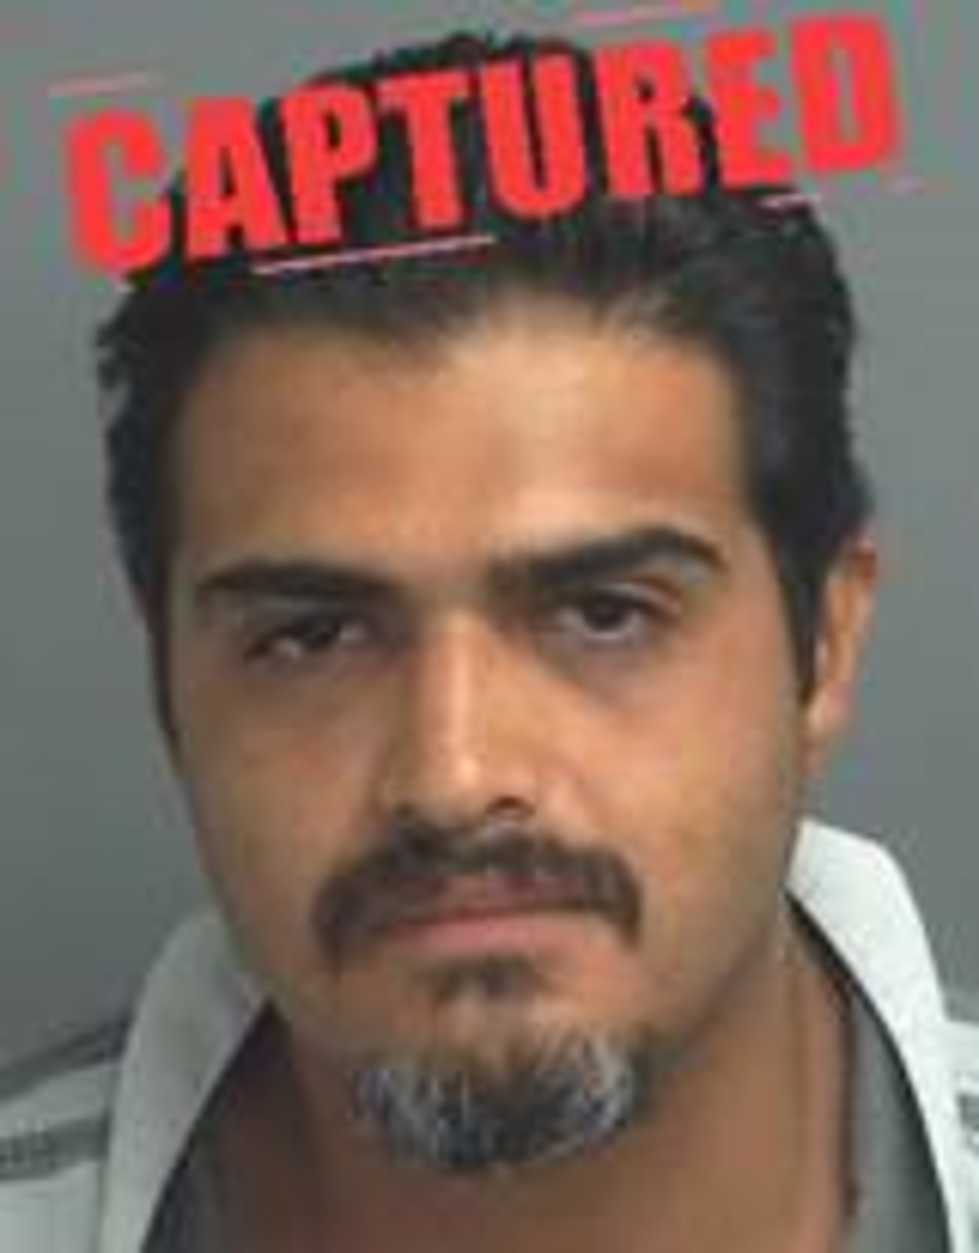 Texas 10 Most Wanted Sex Offender Captured